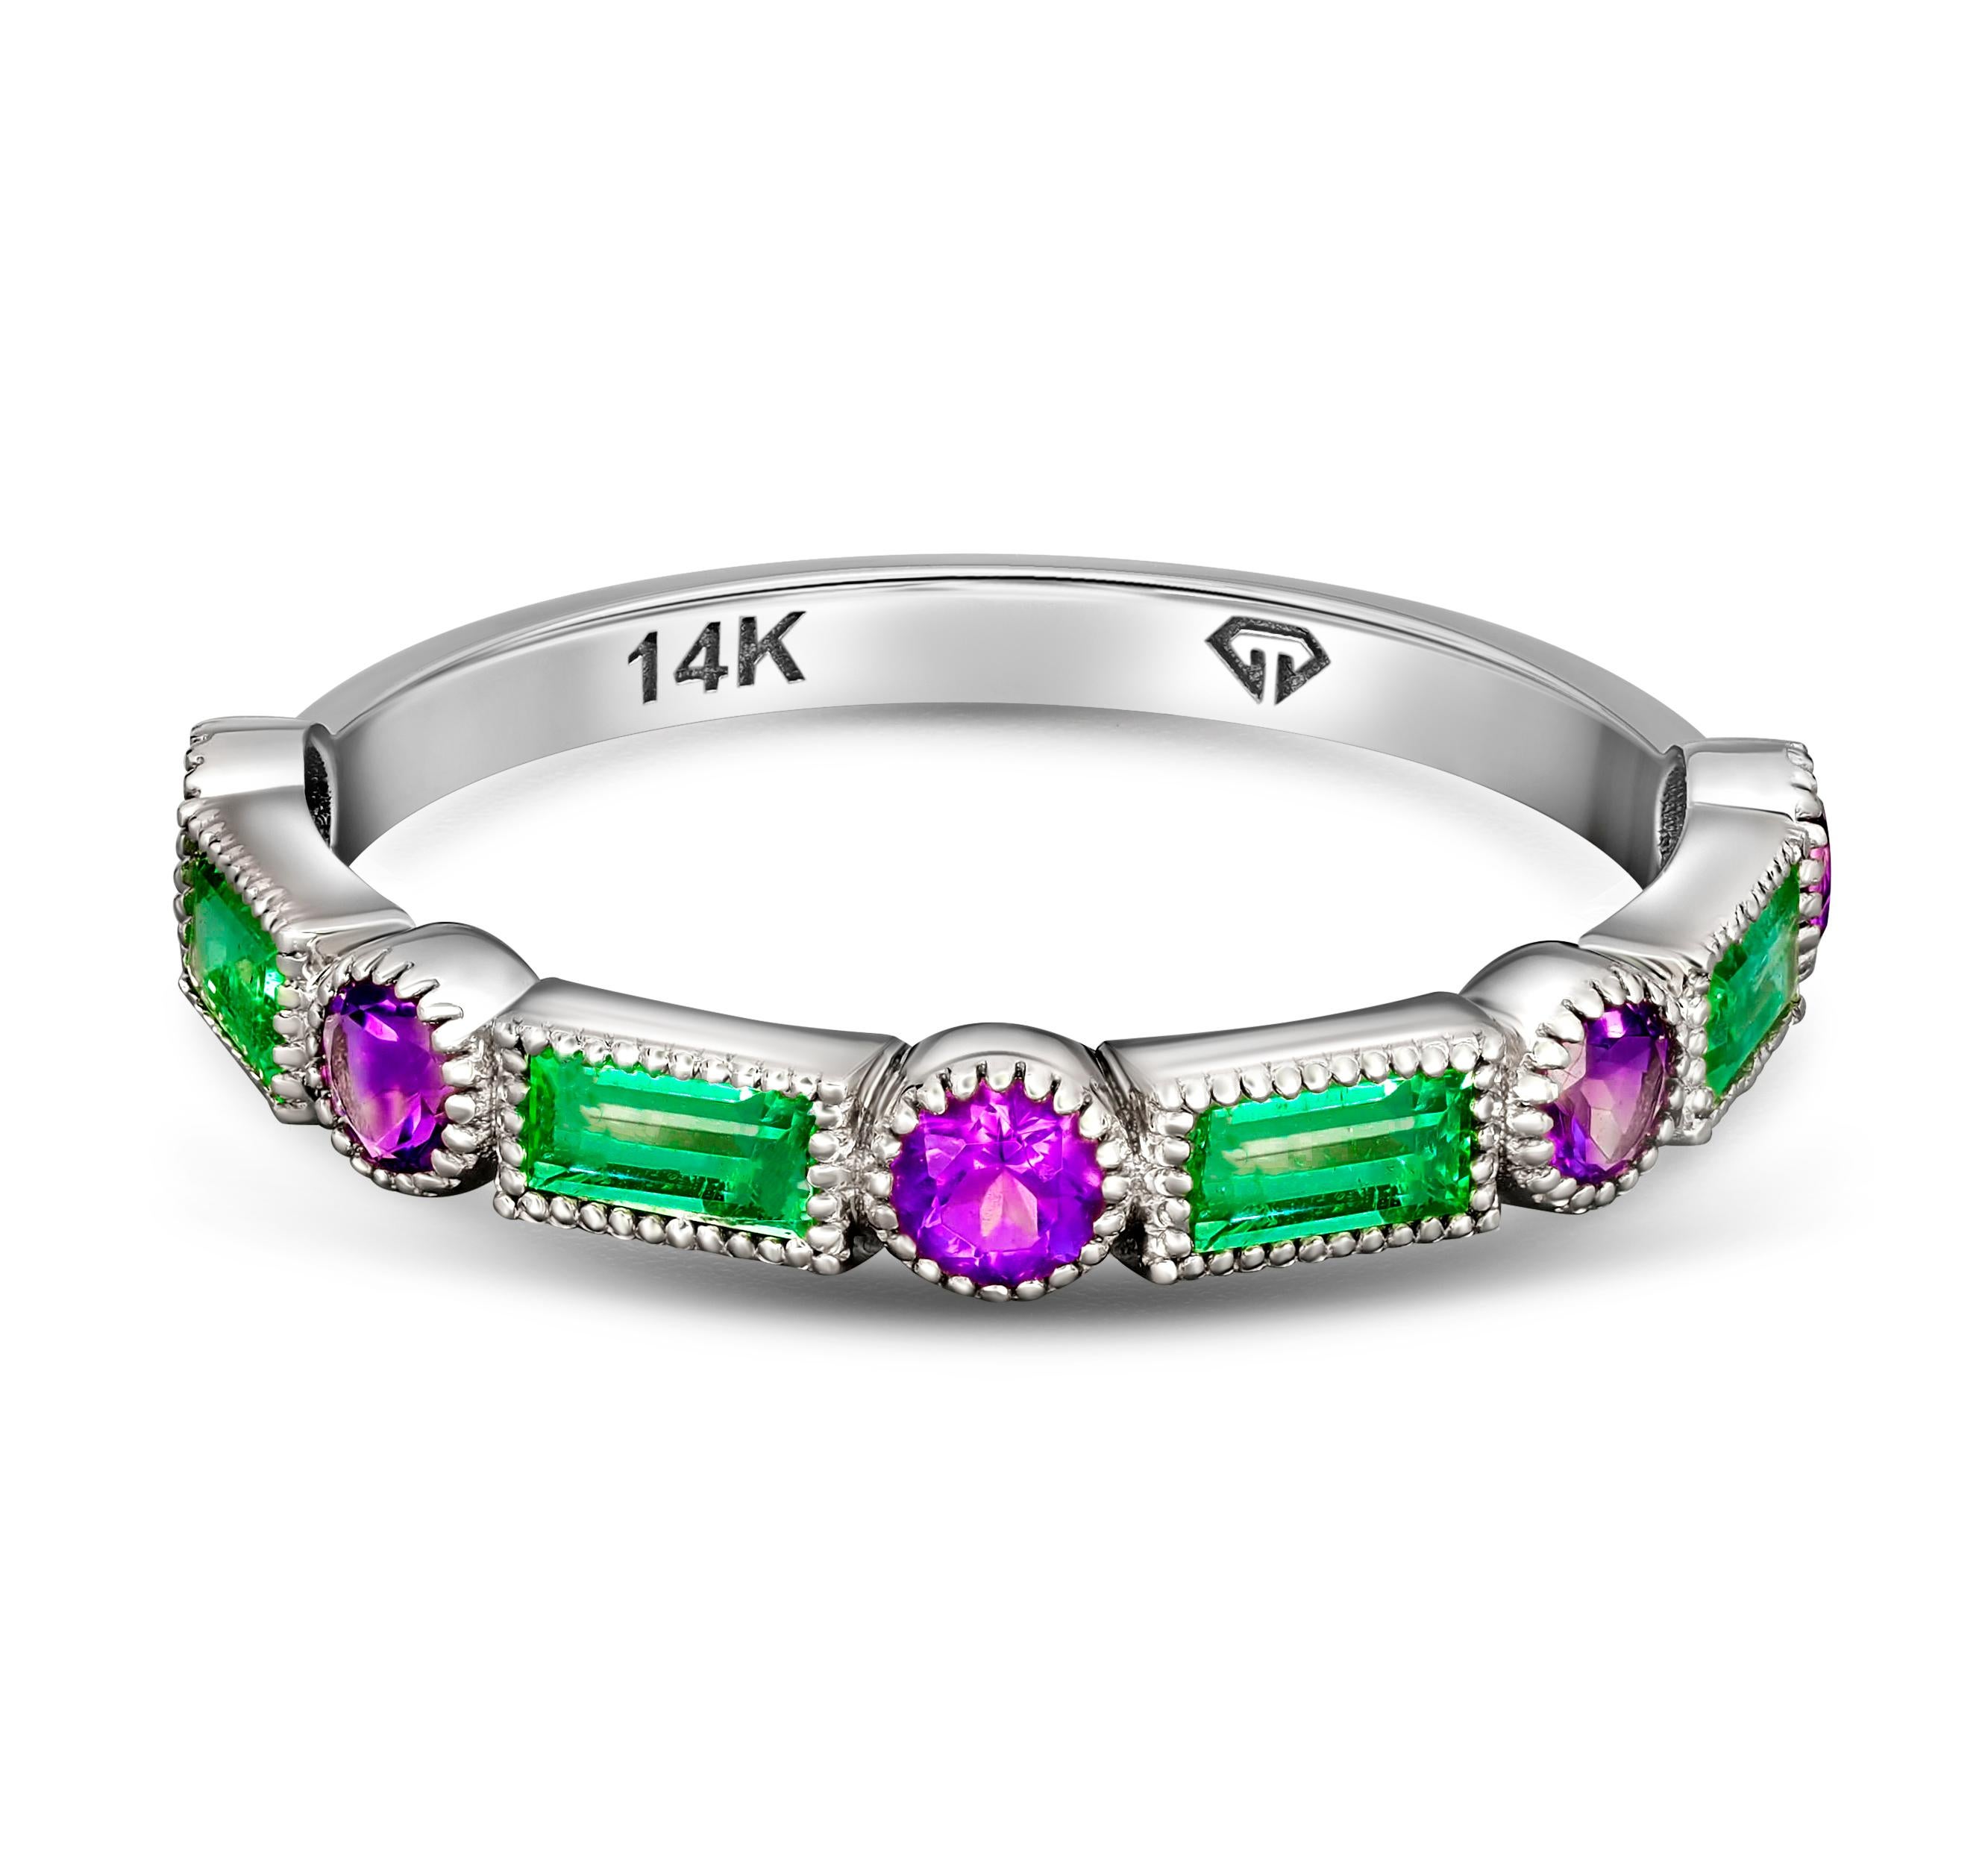 Amethyst, emerald half eternity ring band. 
Amethyst, emerald 14k gold ring. Gemstone semi eternity ring. Two gemstone color ring.

Weight: 1.4 g. depends from size
Metal: 14k gold

Set with emeralds:
Baguette shape, green color, aprx 0.60 ct total